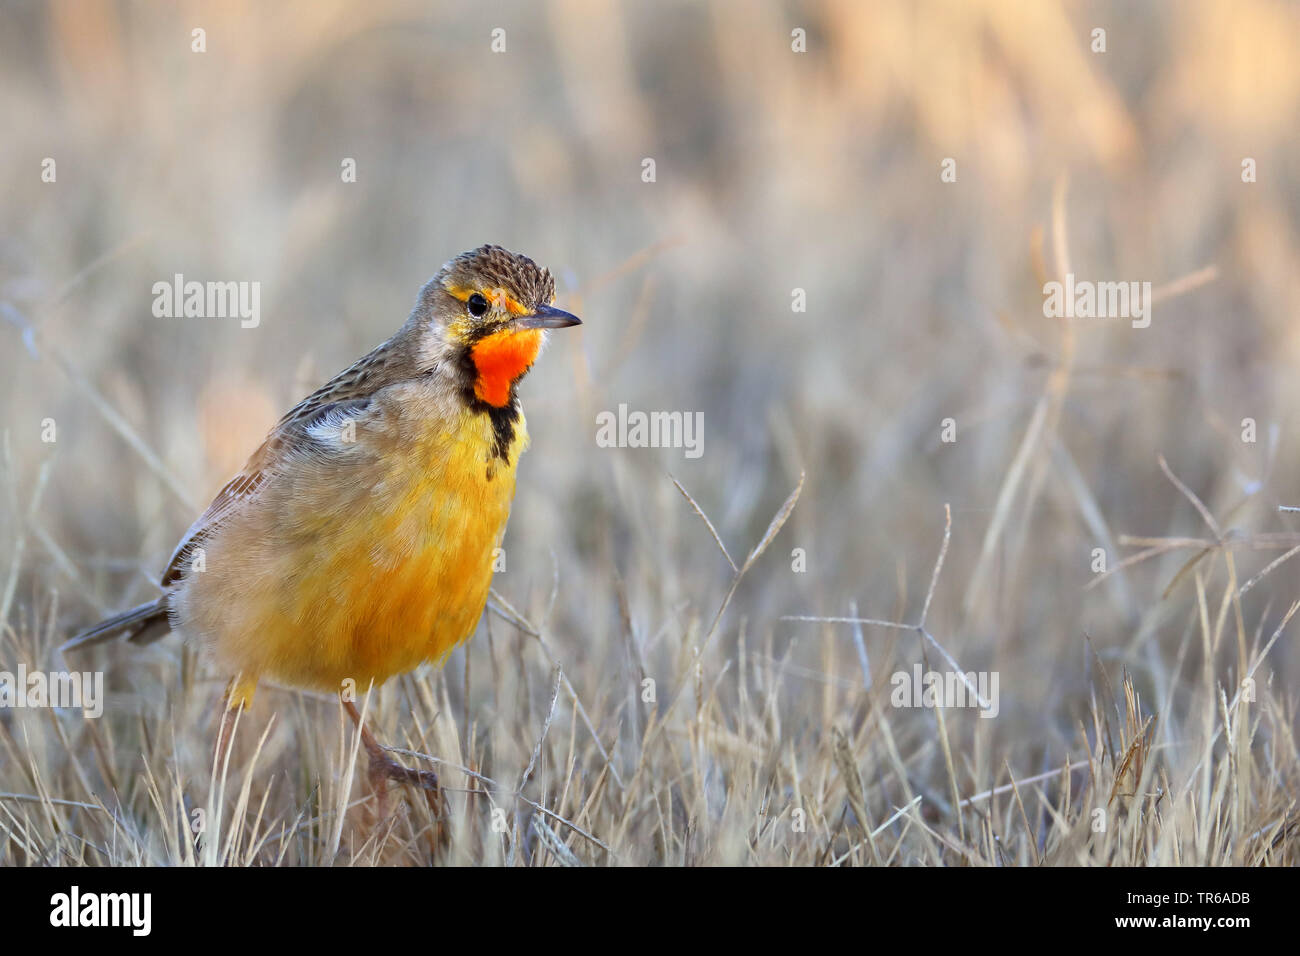 Cape longclaw (Macronyx capensis), sitting on dried grass, South Africa, North West Province, Pilanesberg National Park Stock Photo